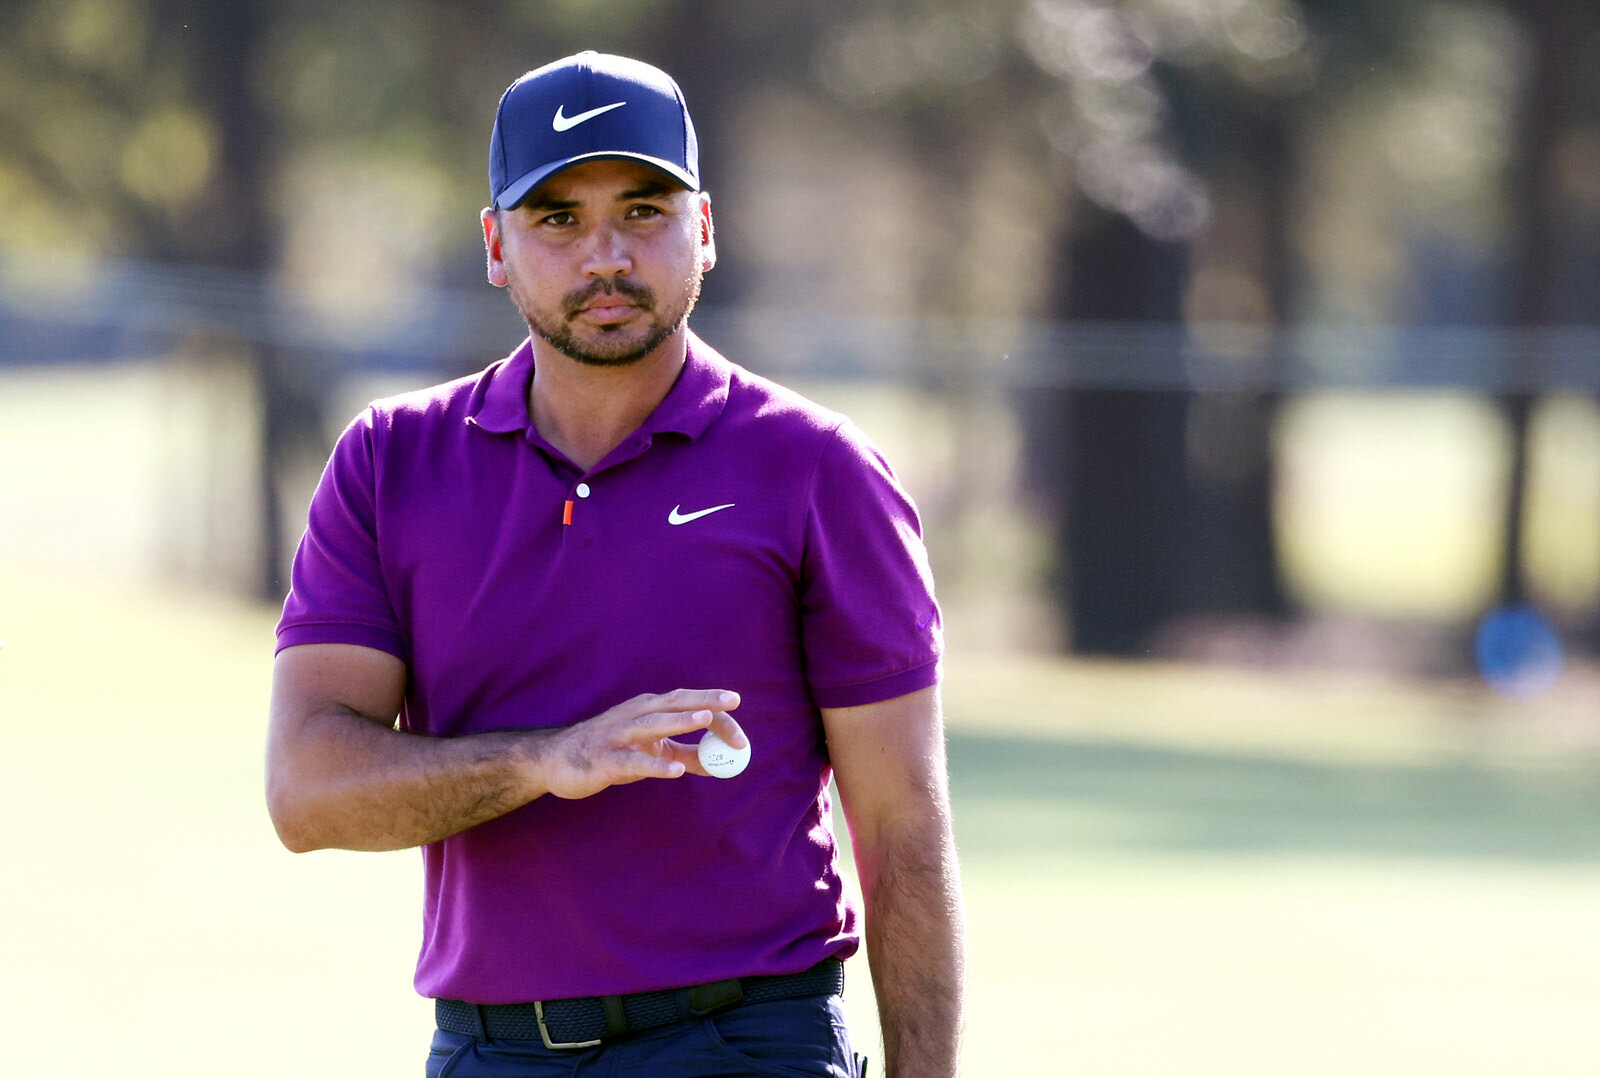  HOUSTON, TEXAS - NOVEMBER 07: Jason Day of Australia acknowledges fans on the 16th green during the third round of the Houston Open at Memorial Park Golf Course on November 07, 2020 in Houston, Texas. (Photo by Maddie Meyer/Getty Images) 